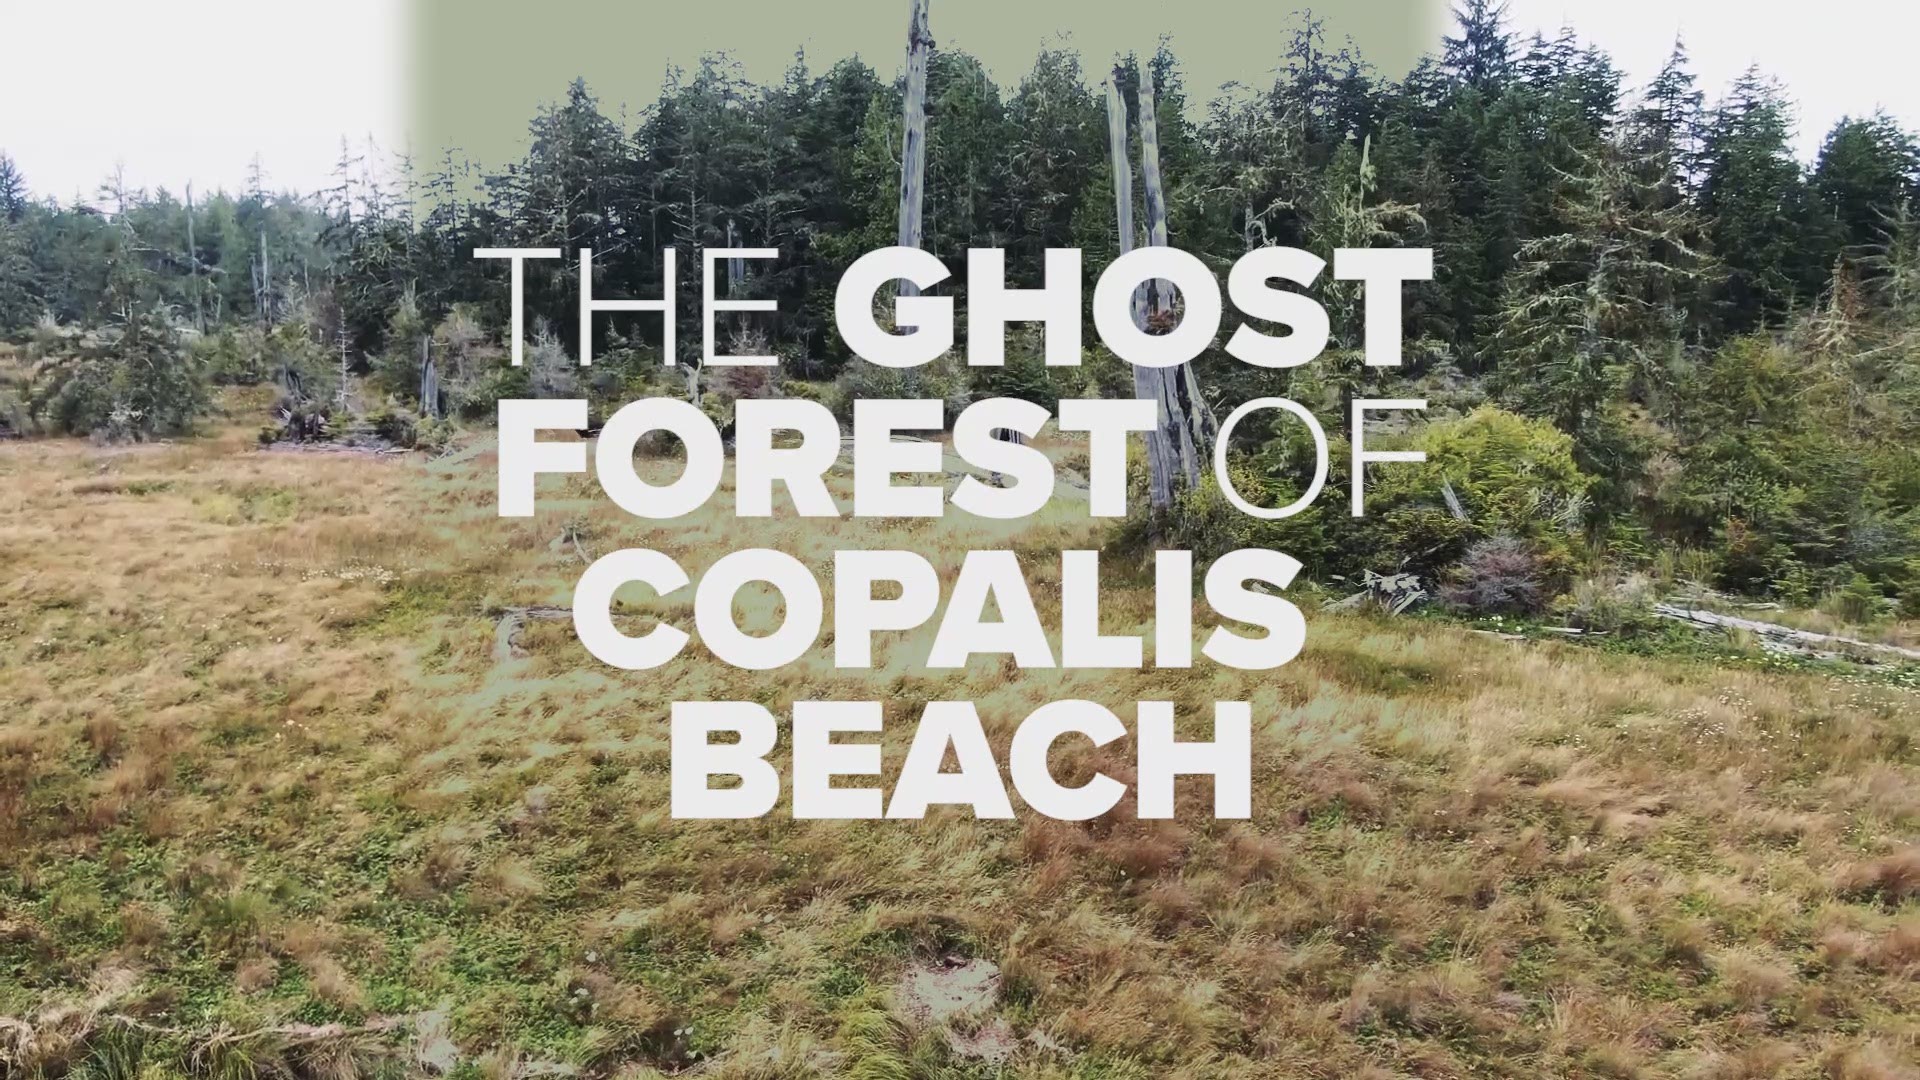 Near Copalis Beach in Grays Harbor County, Washington is a ghost forest.  A haunting salt marsh transformed by an earthquake hundreds of years ago.